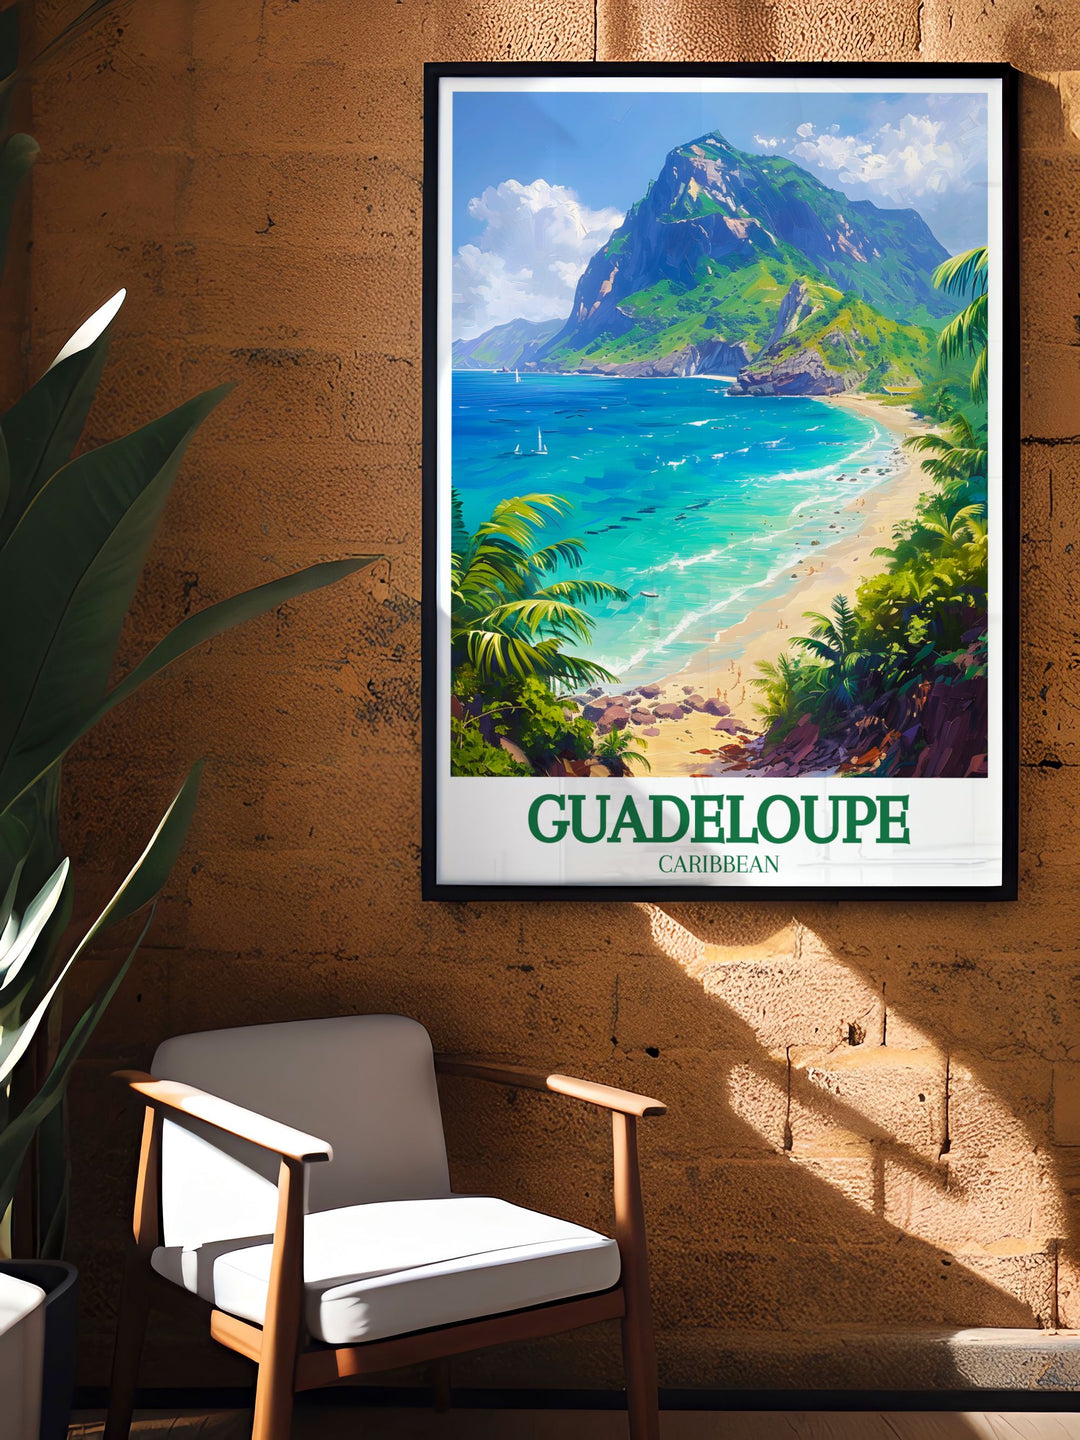 This art print highlights the rich cultural history of Guadeloupe, featuring historic landmarks and sites that reflect its diverse heritage. Perfect for history lovers, this poster offers a glimpse into the Caribbeans vibrant past.